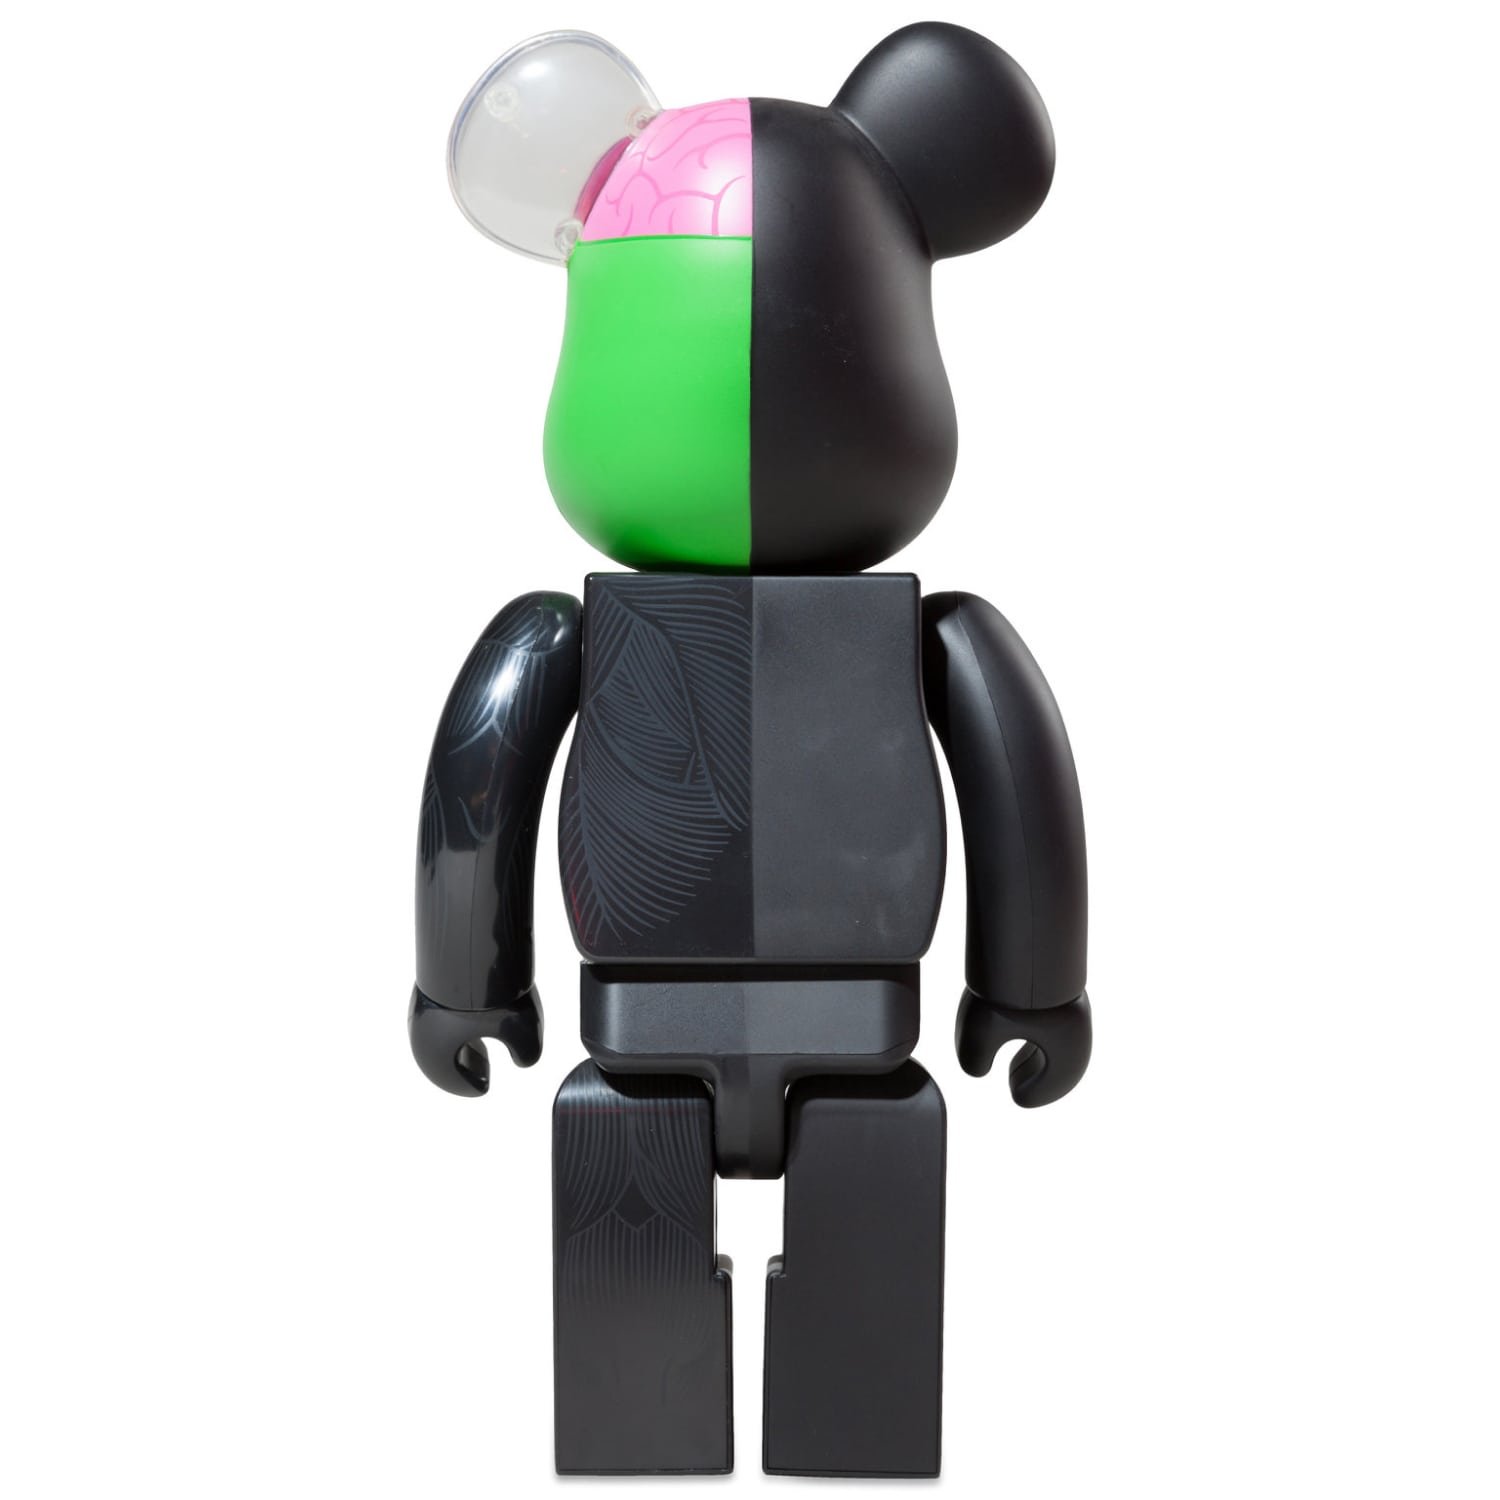 Kaws Dissected” from Be@rbrick - Dope! Gallery